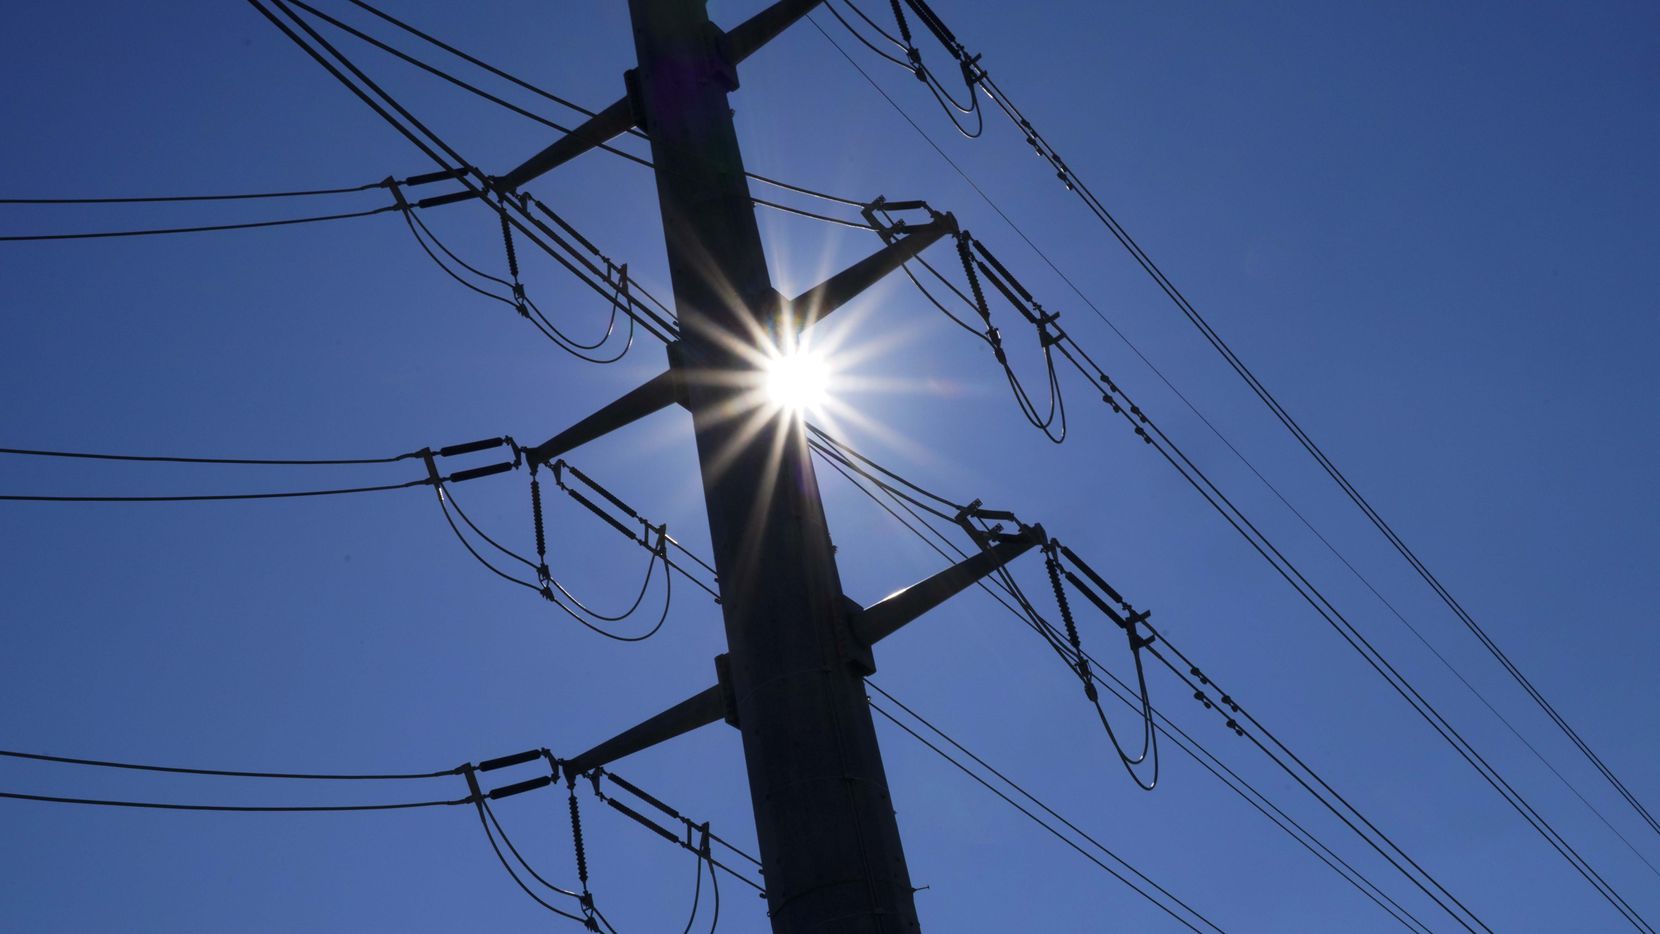 The Public Utility Commission approved the purchase of $3 billion in bonds for electricity...